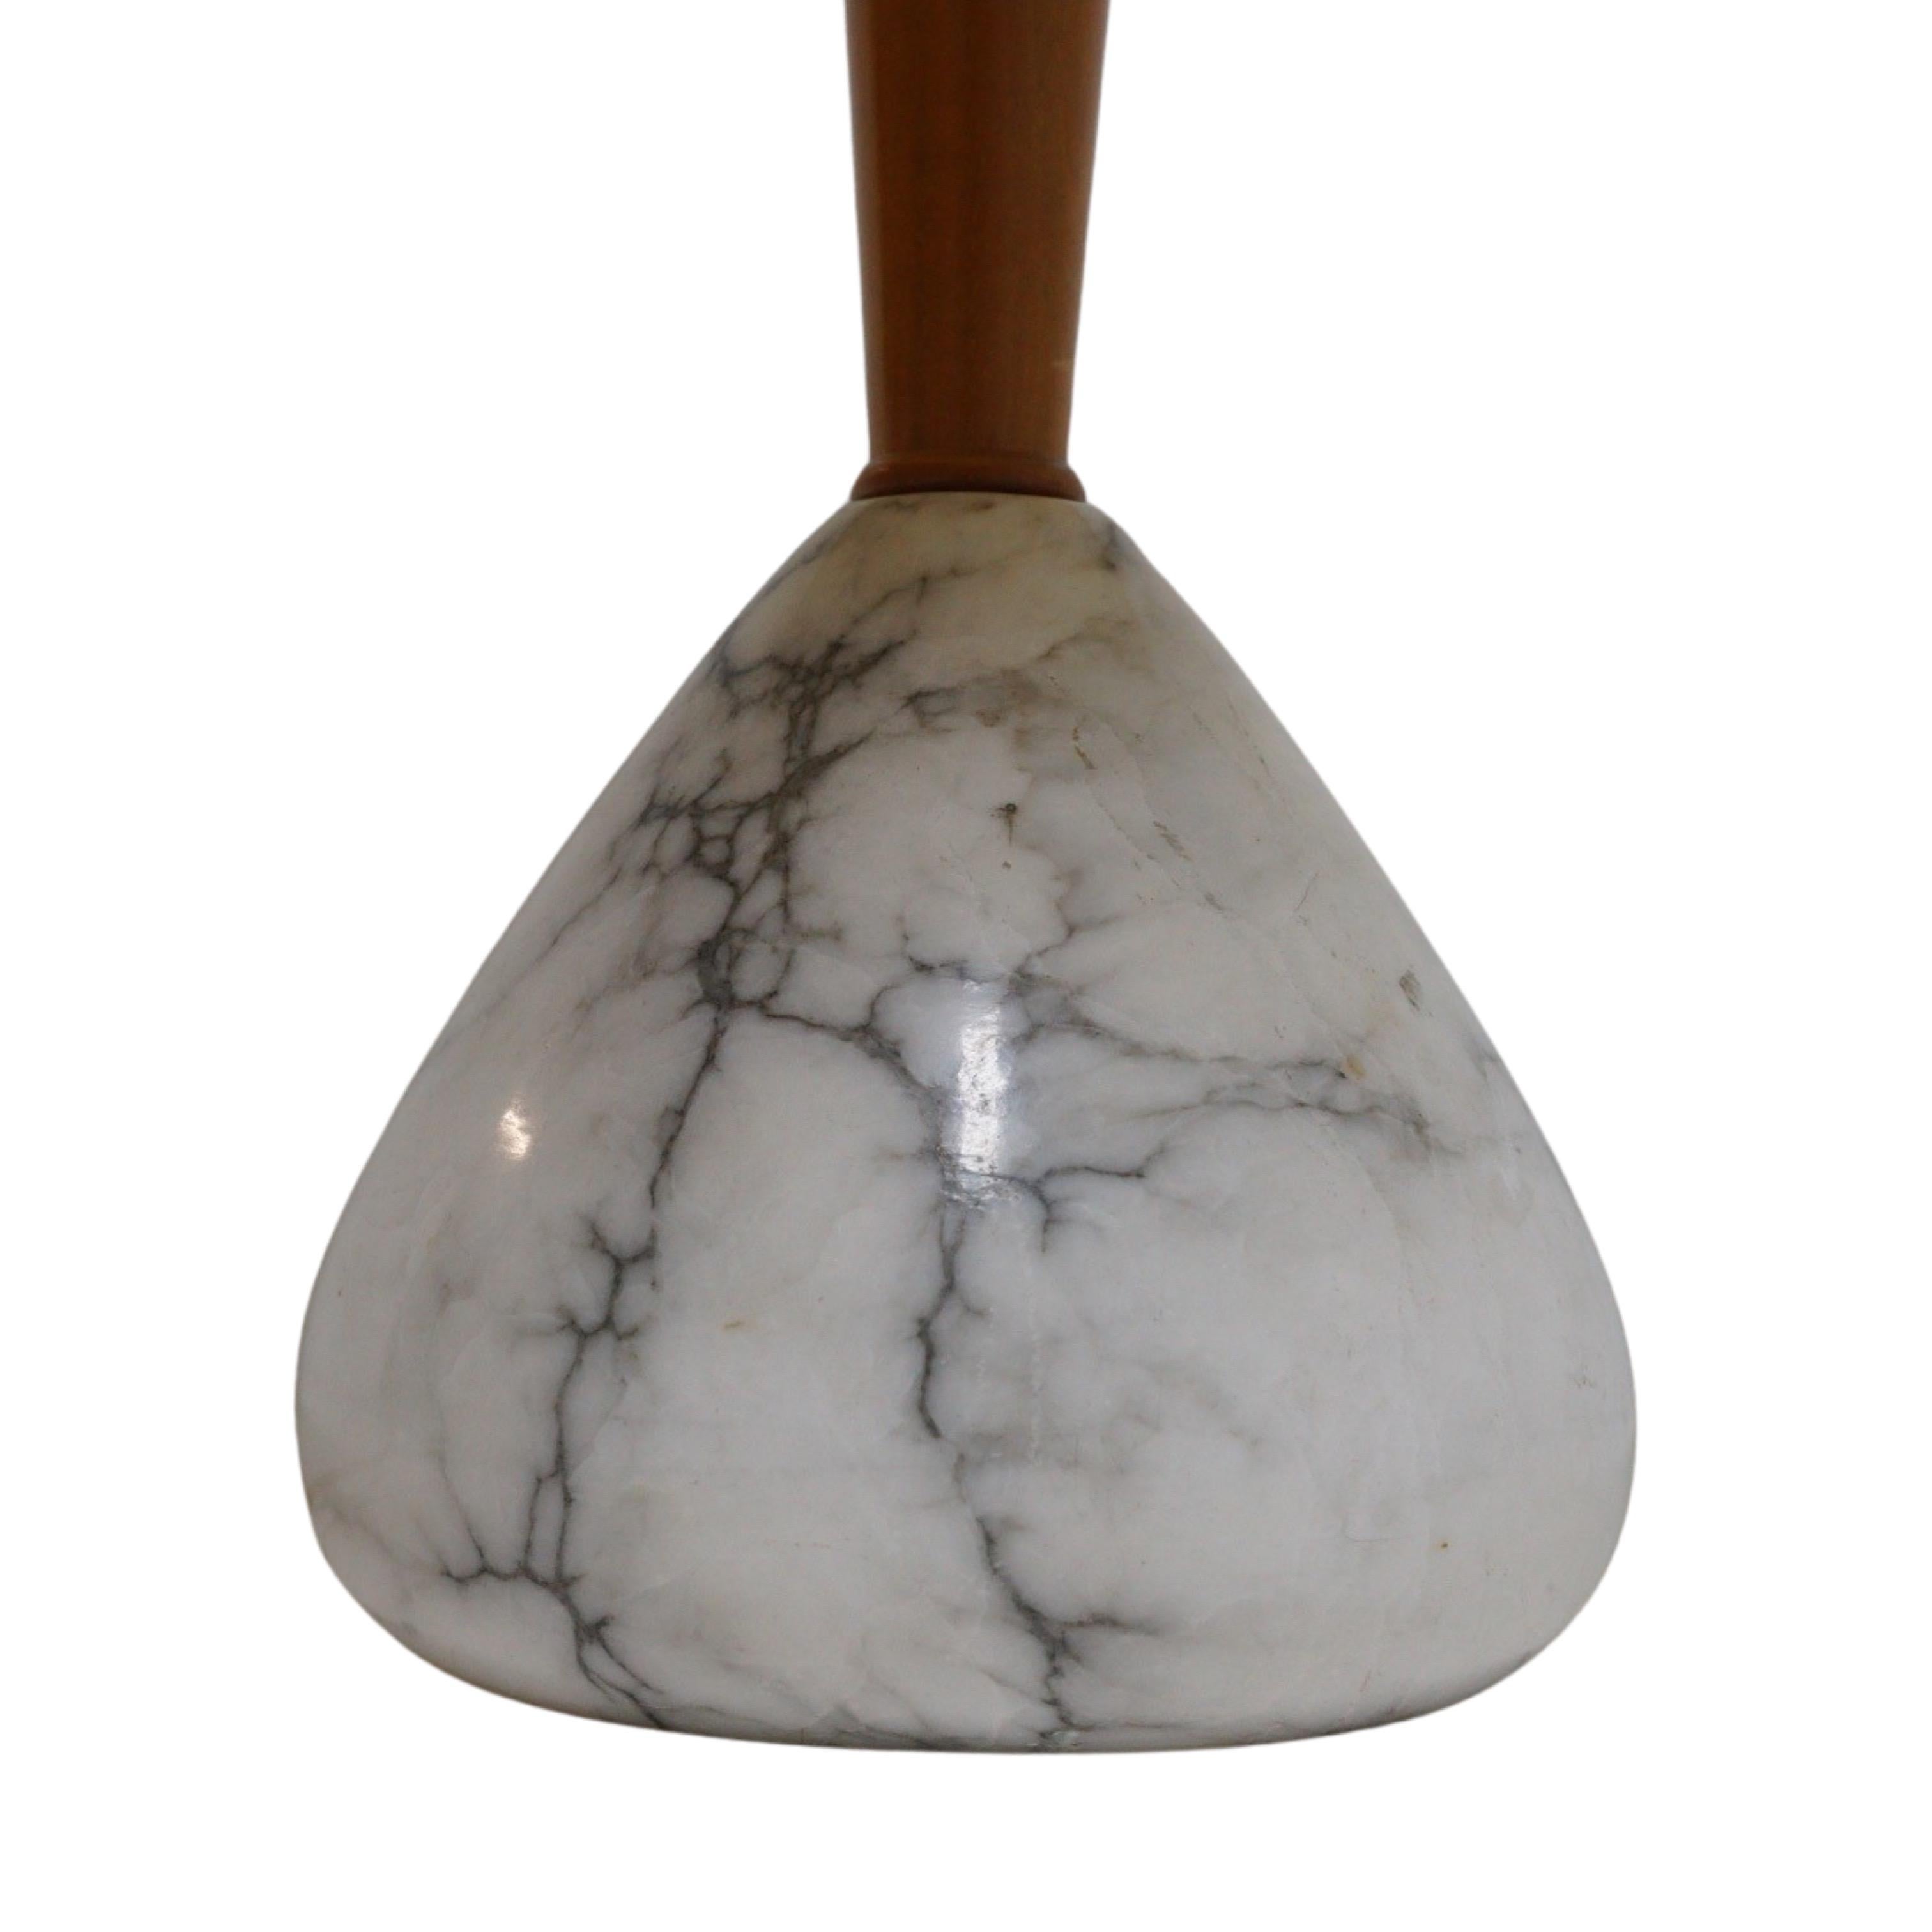 These lamps are like the highway mile markers of the midcentury. Carrara marble wonders – smooth, cool, and leading you on a journey through time. Dust off your vinyl records, put on a Sinatra tune, and let these timeless pieces transport you to an